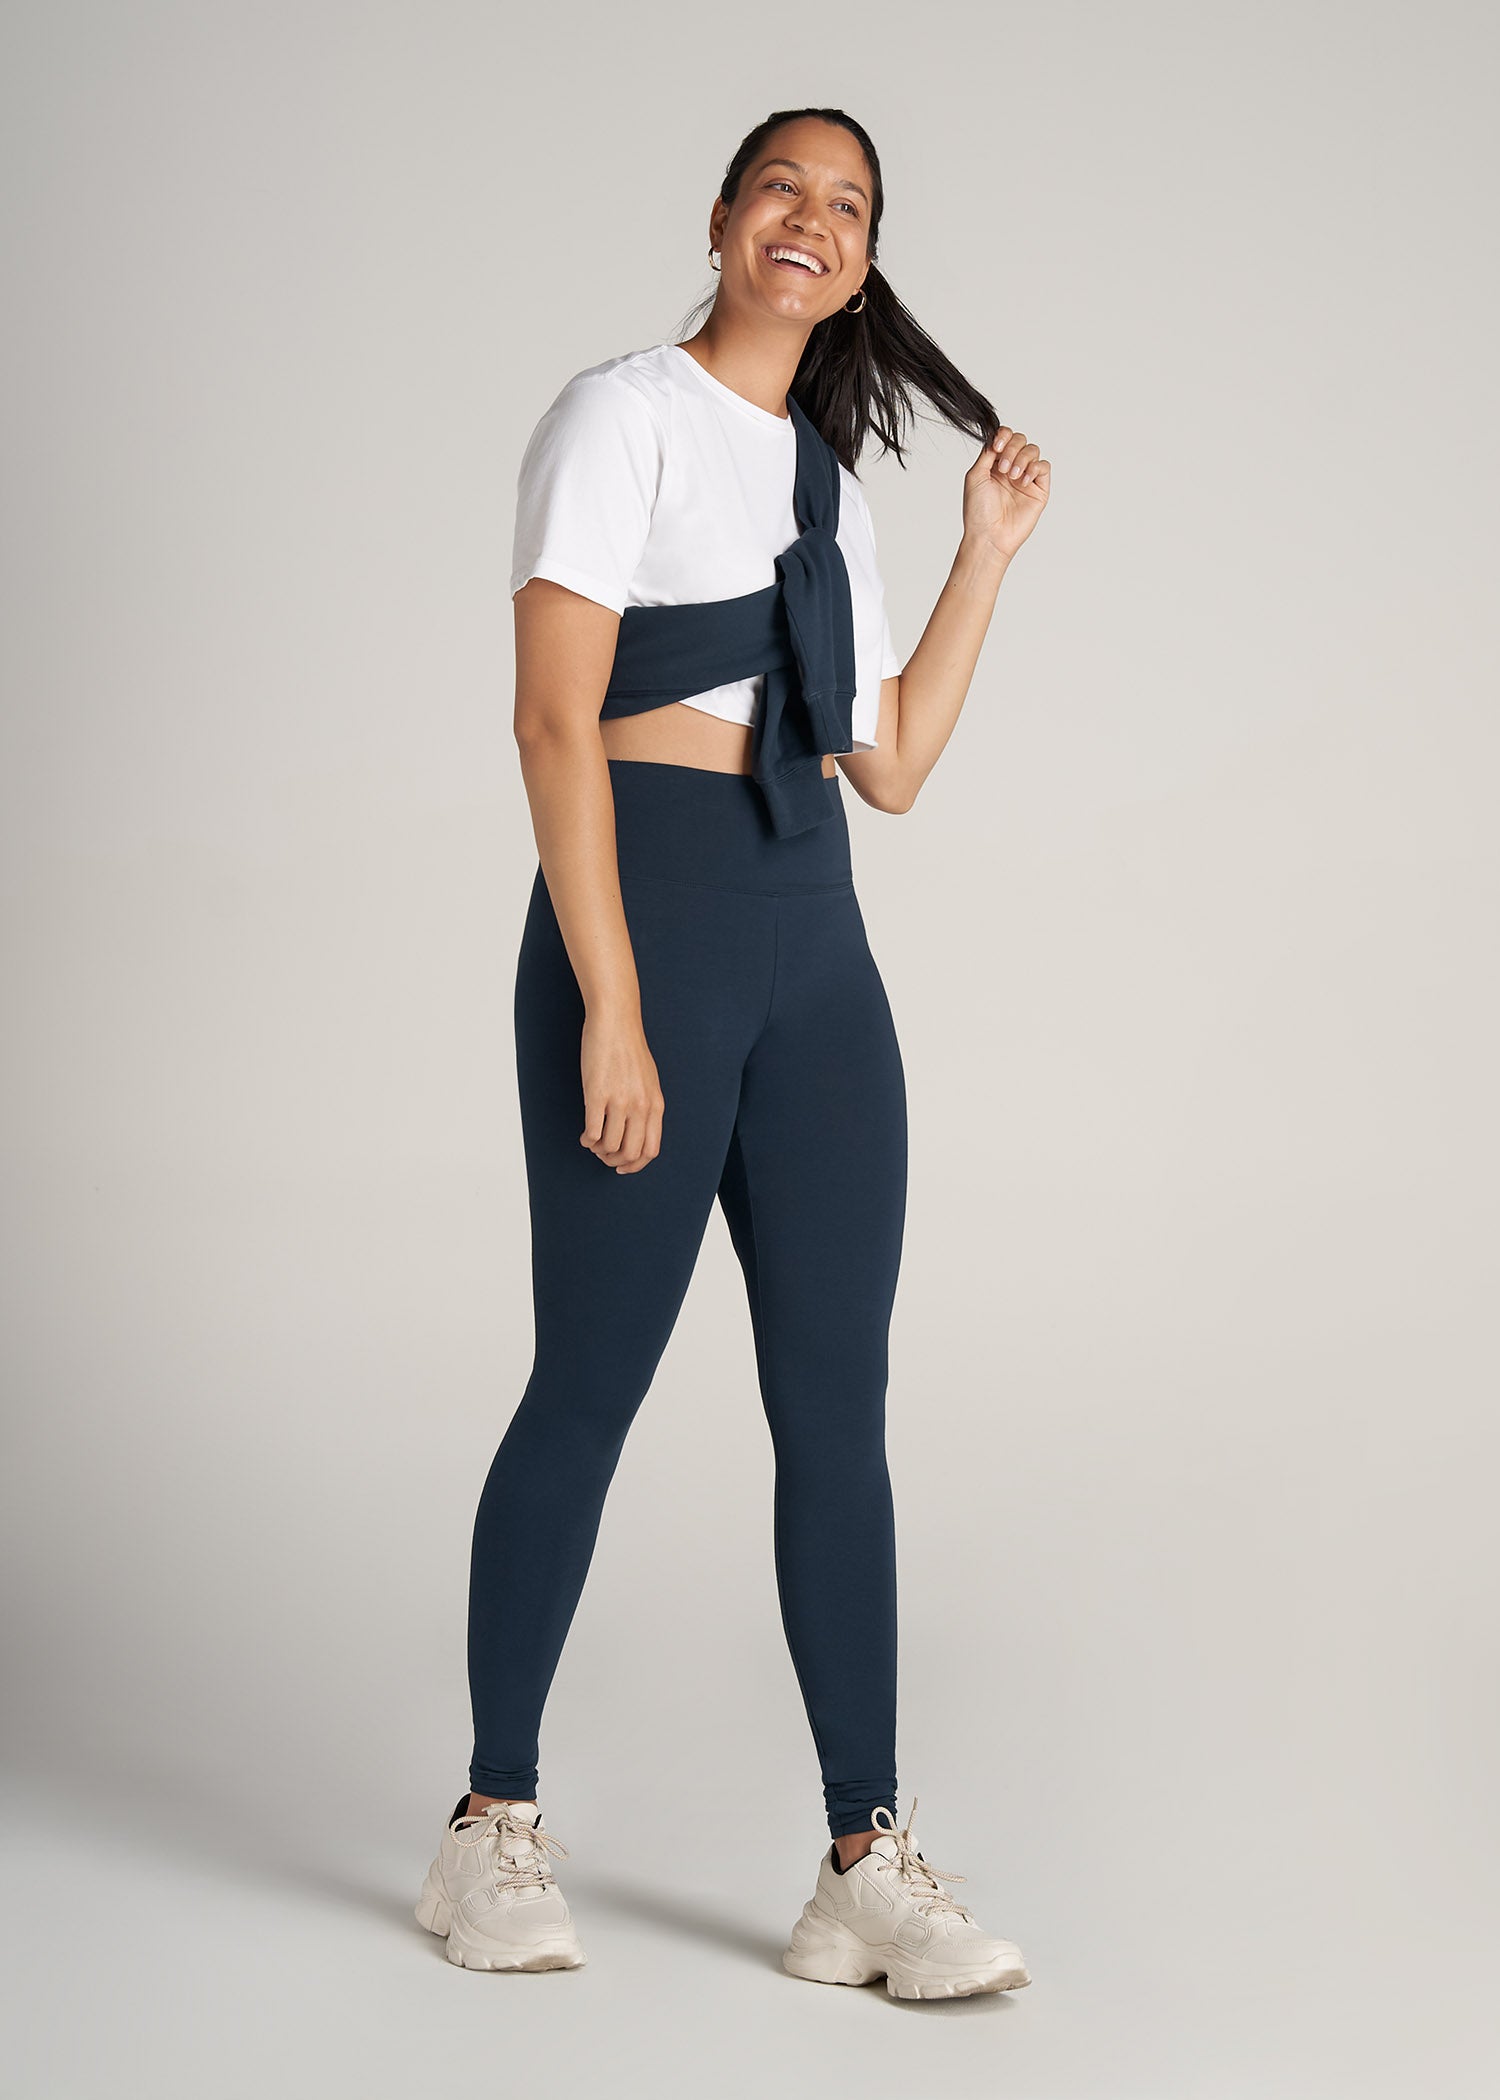 tall girl leggings, tall girl leggings Suppliers and Manufacturers at